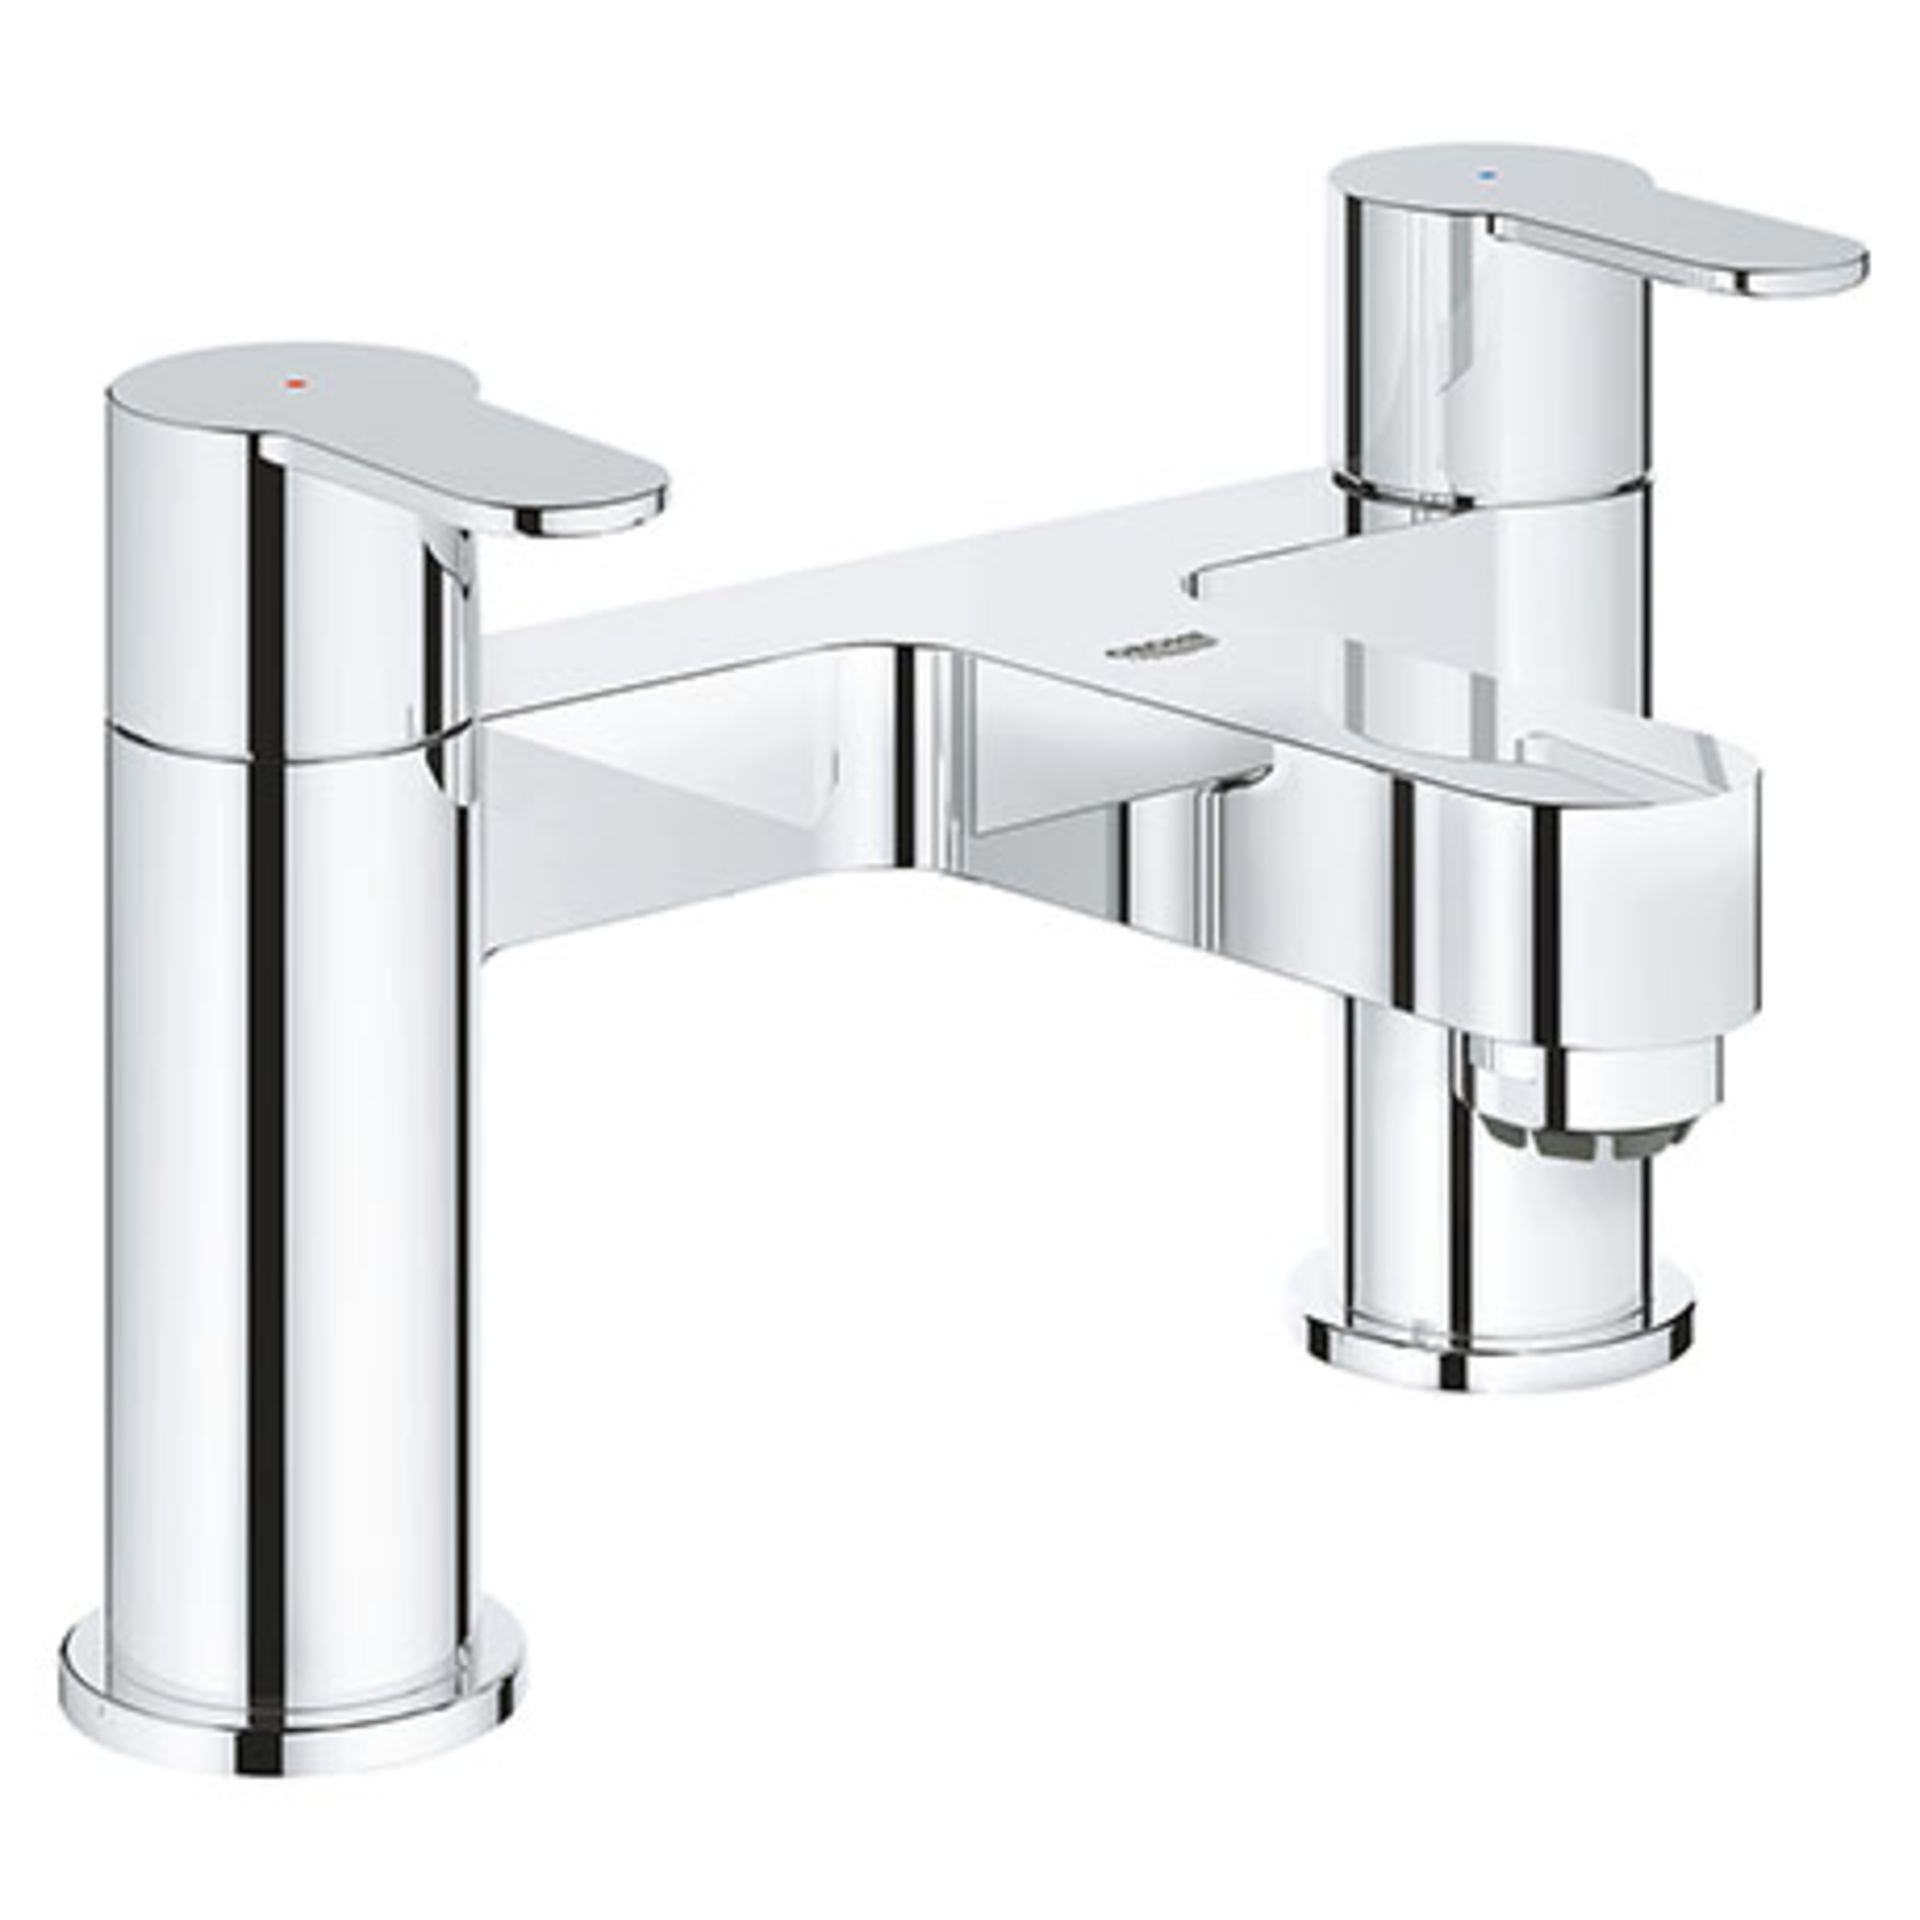 (SH1016)Grohe BauEdge Bath Filler. Stylish and modern, the BauEdge bath filler features solid m...